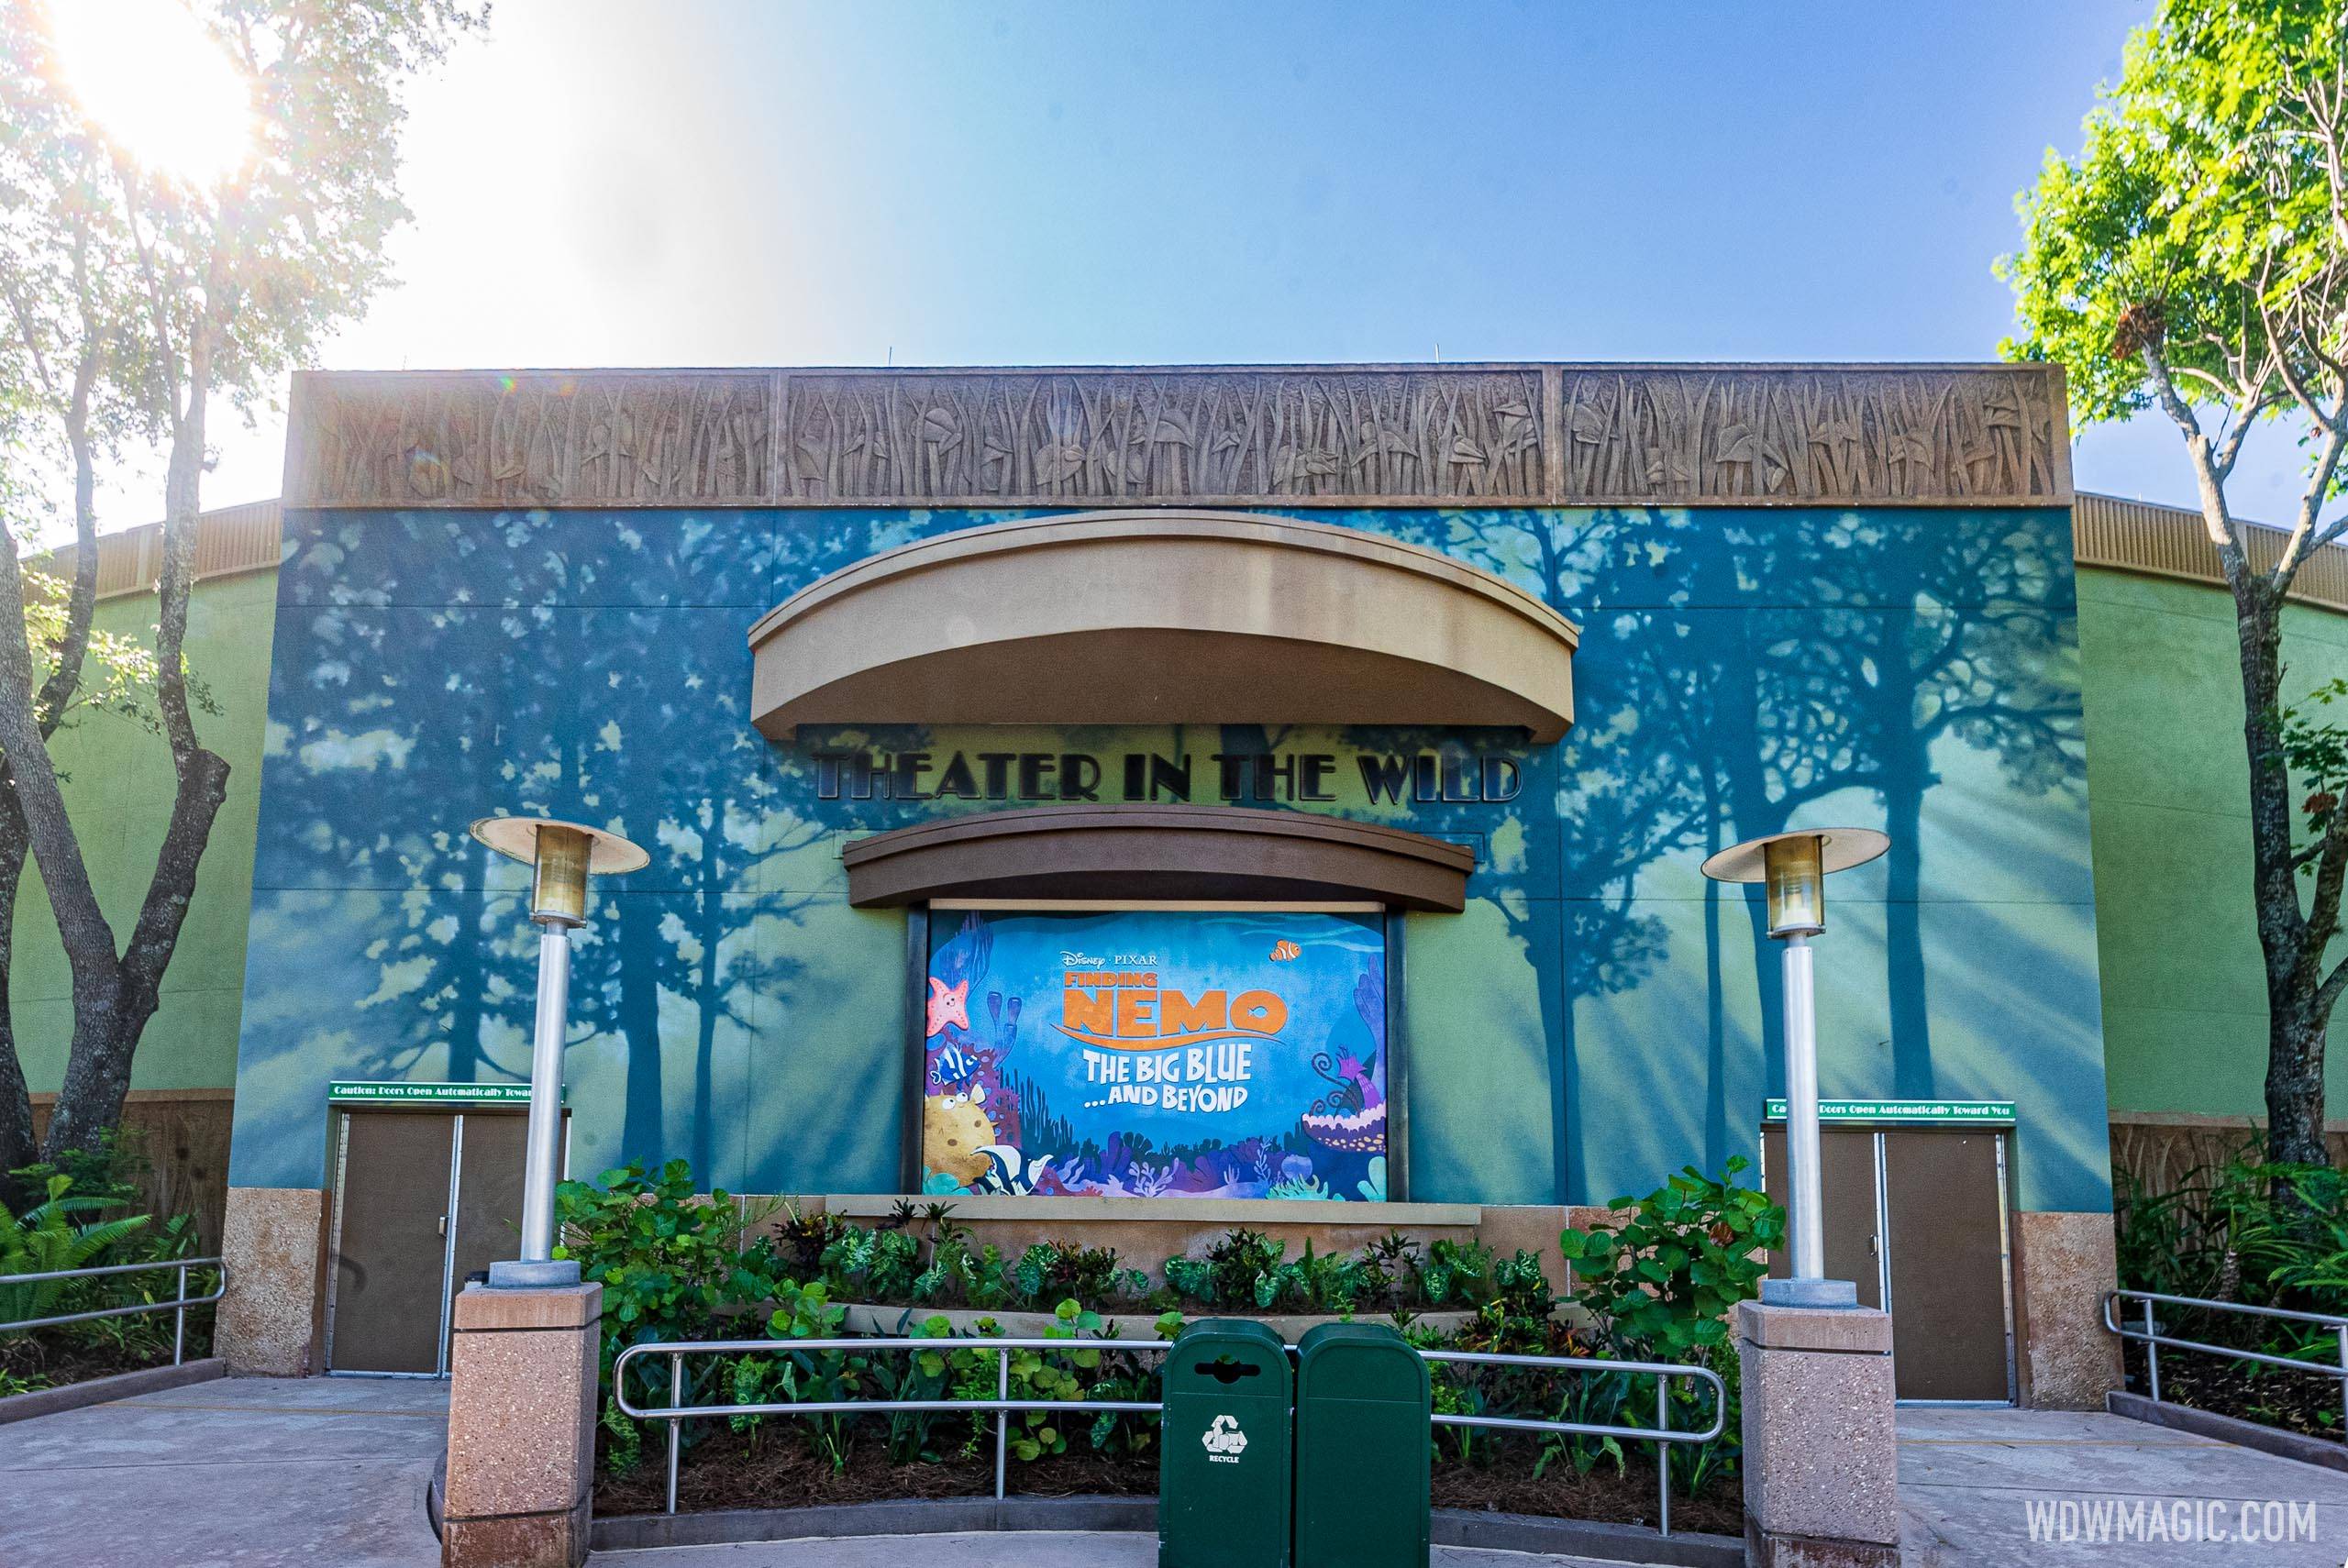 'Finding Nemo: The Big Blue… and Beyond! theater and signs